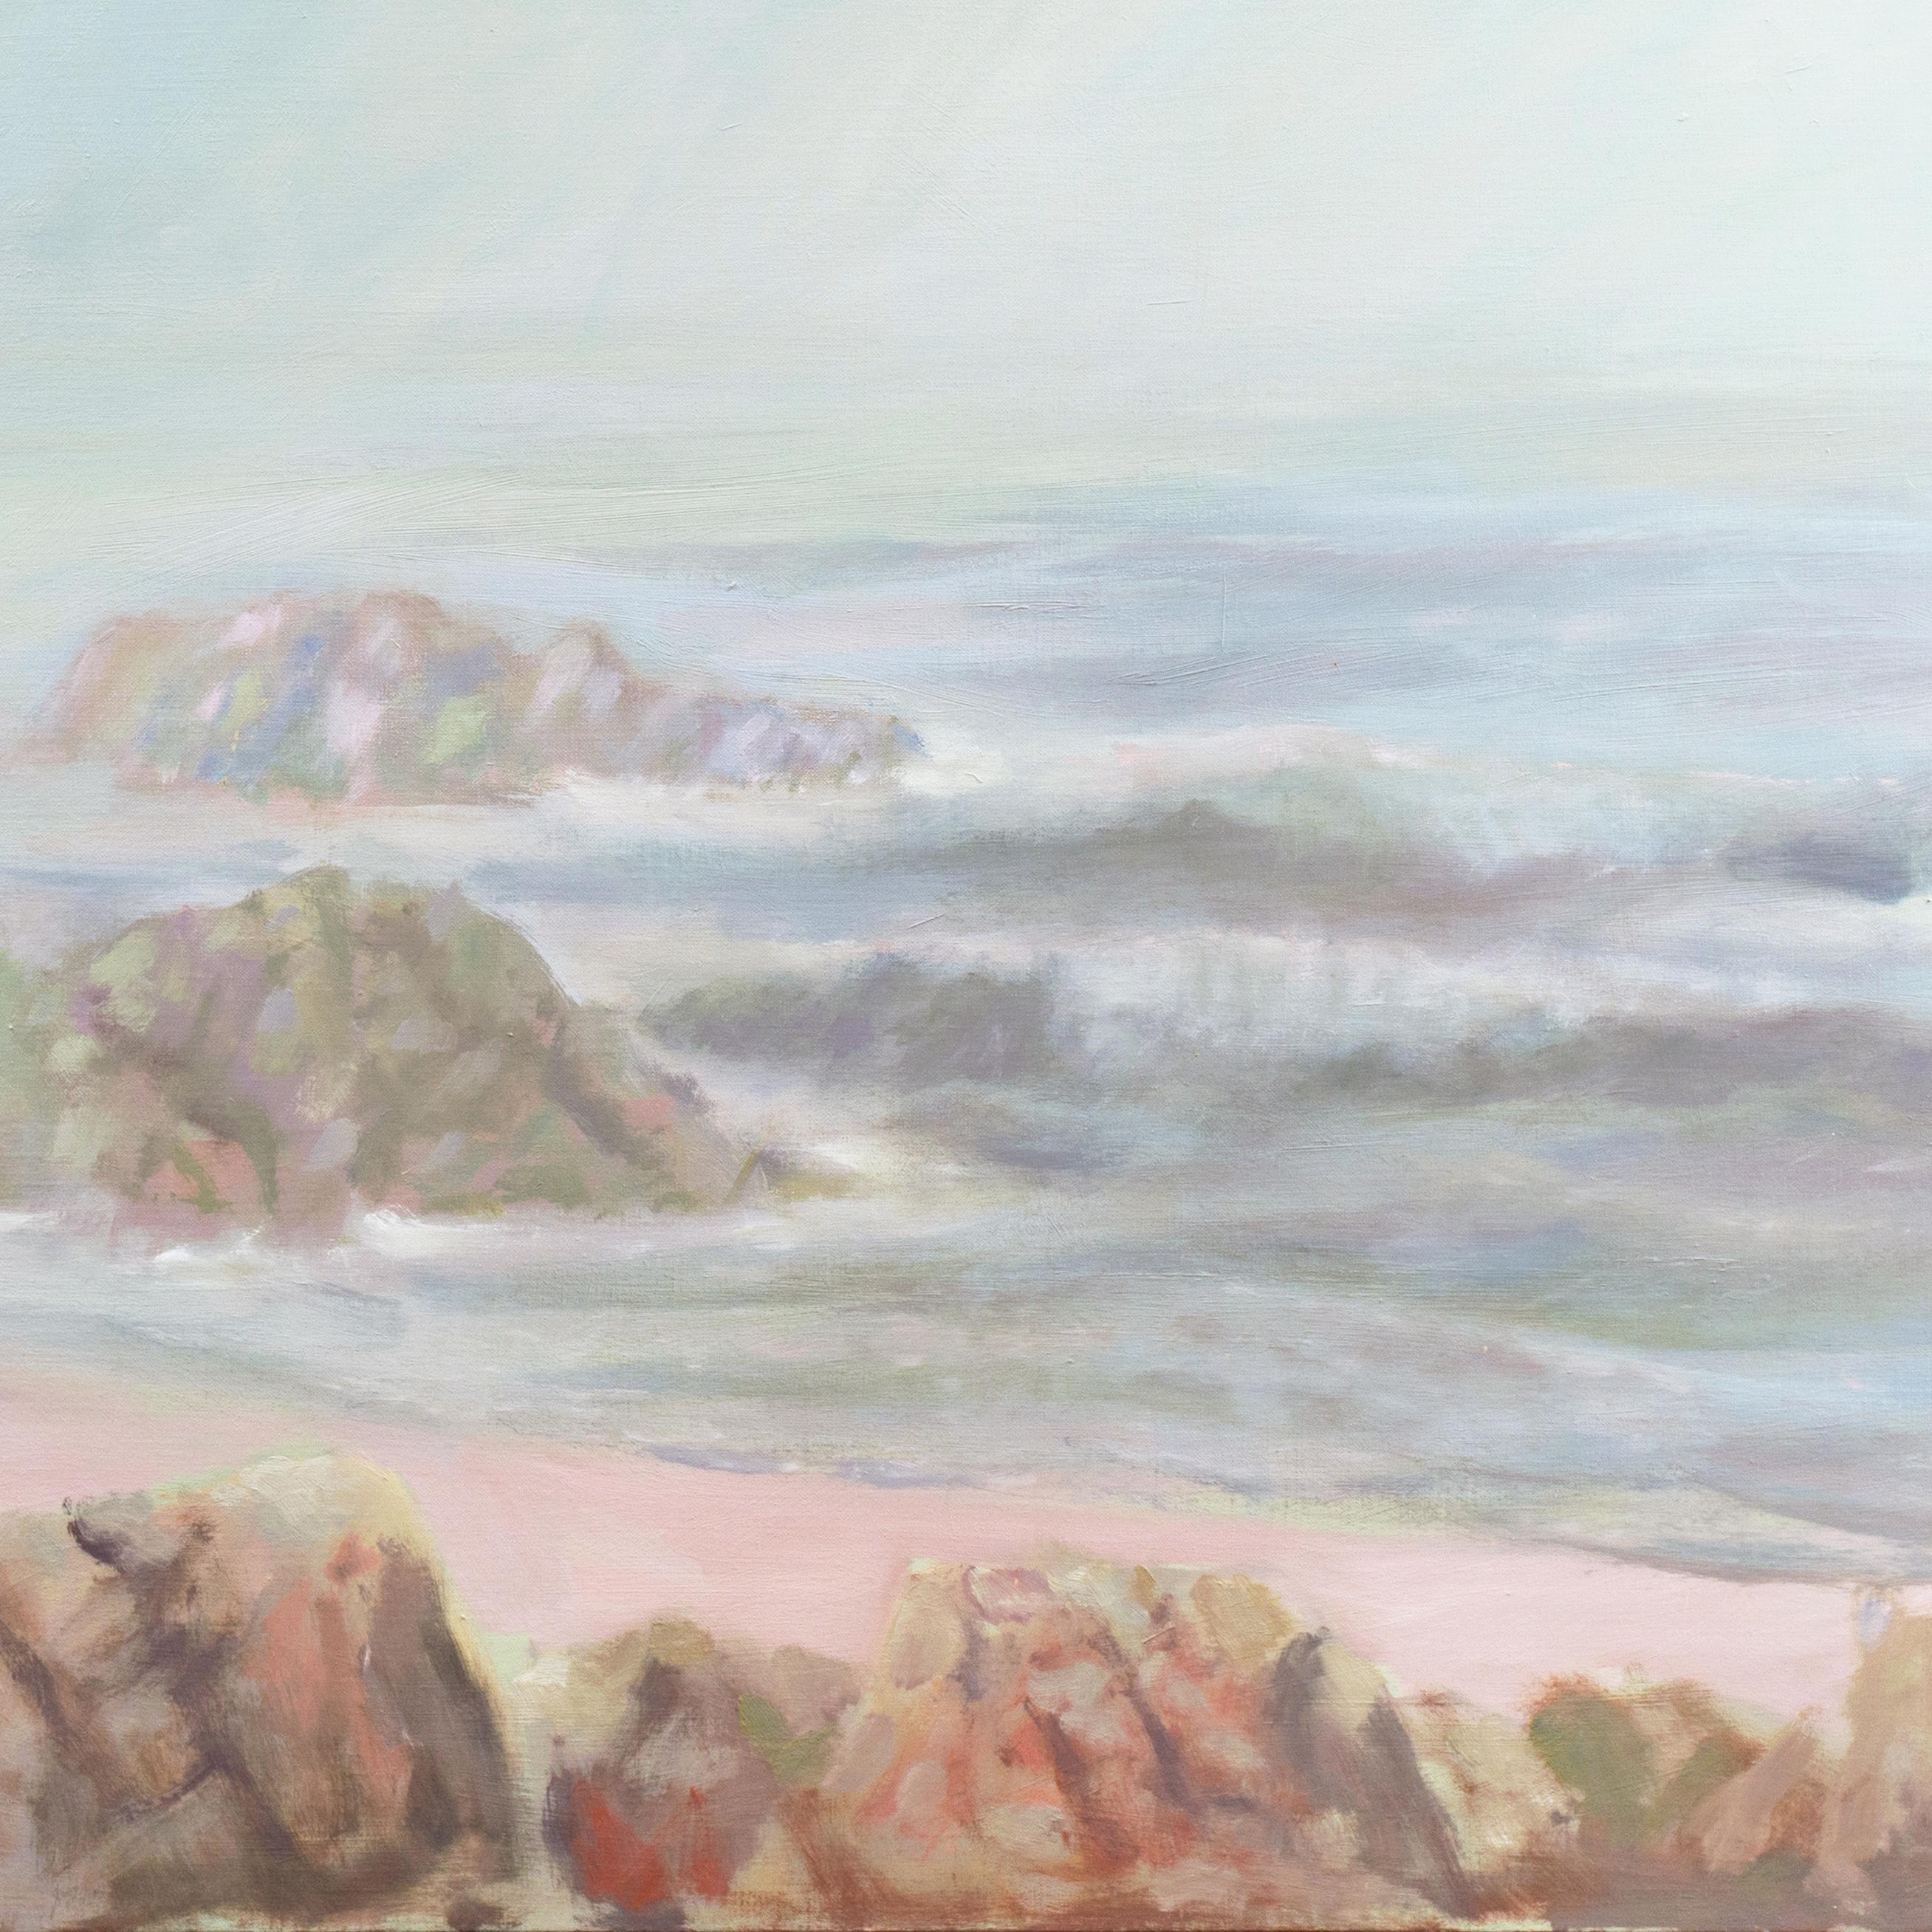 Signed lower left, 'P. Thorngate' for Philip Thorngate (American, 1932-2003) and painted circa 1994; Bearing old Carmel Art Association exhibition label verso. 

A substantial, oil coastal landscape showing a view of the morning mists on the rocky